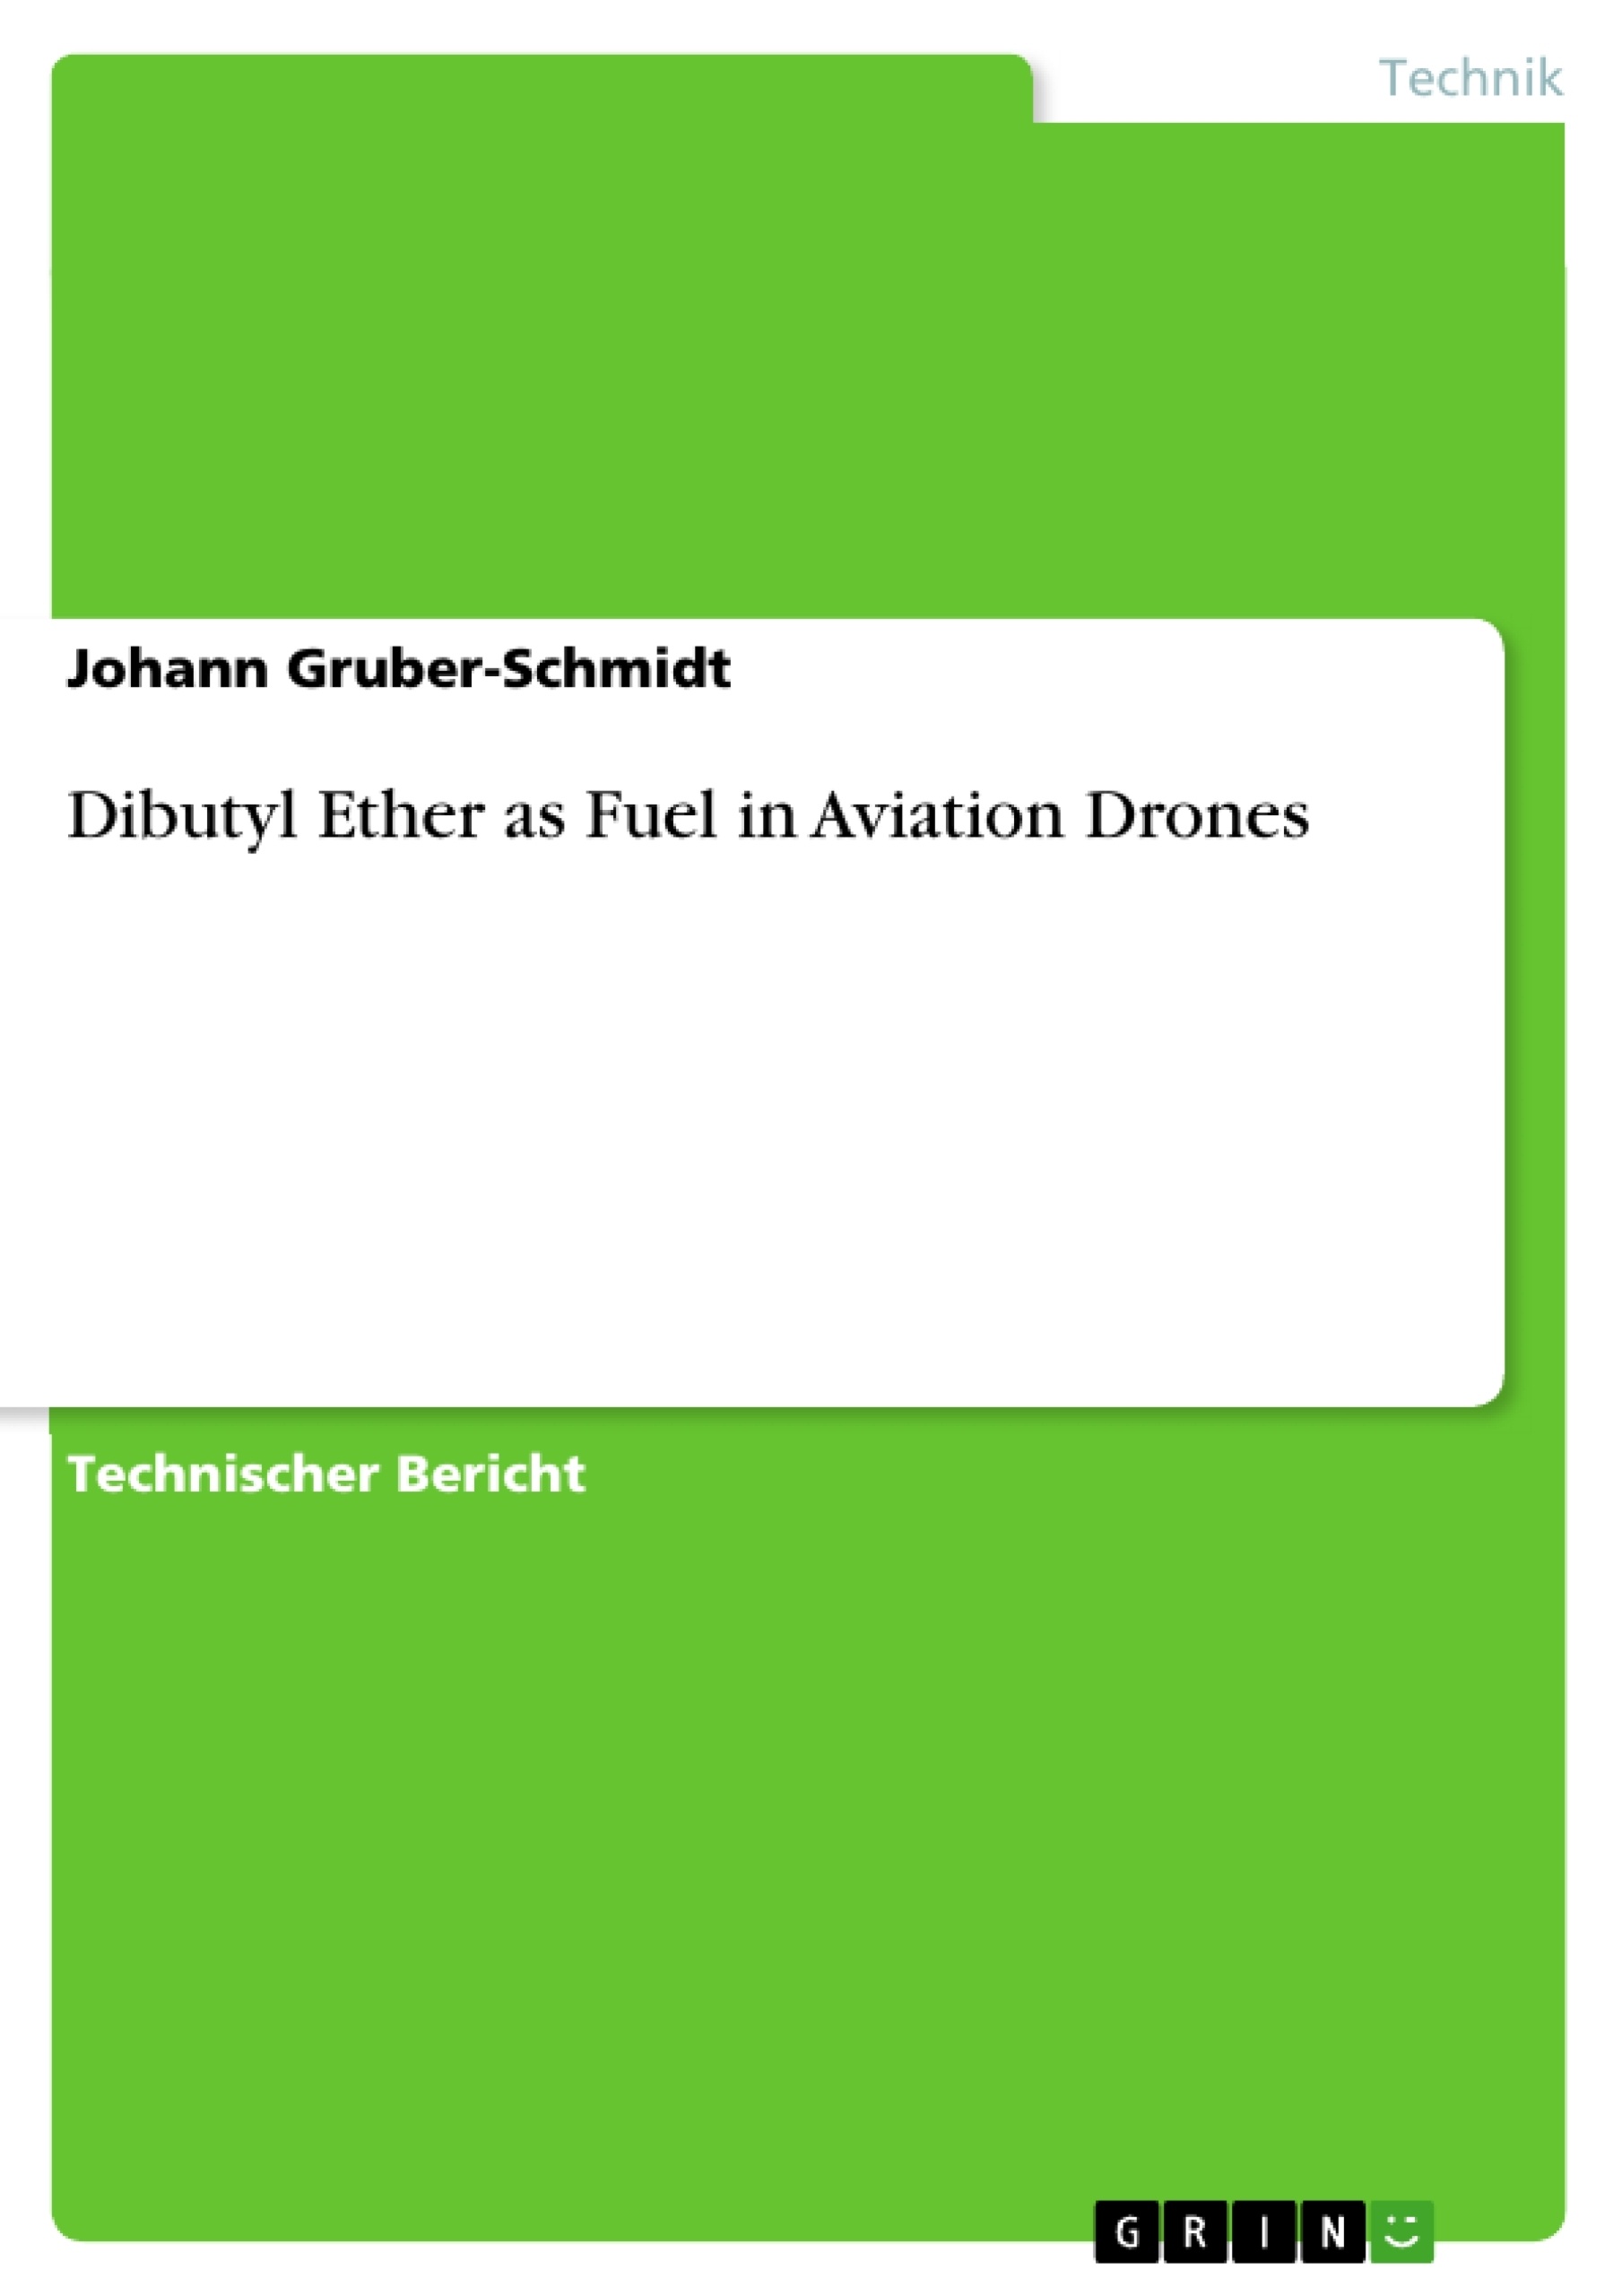 Title: Dibutyl Ether as Fuel in Aviation Drones